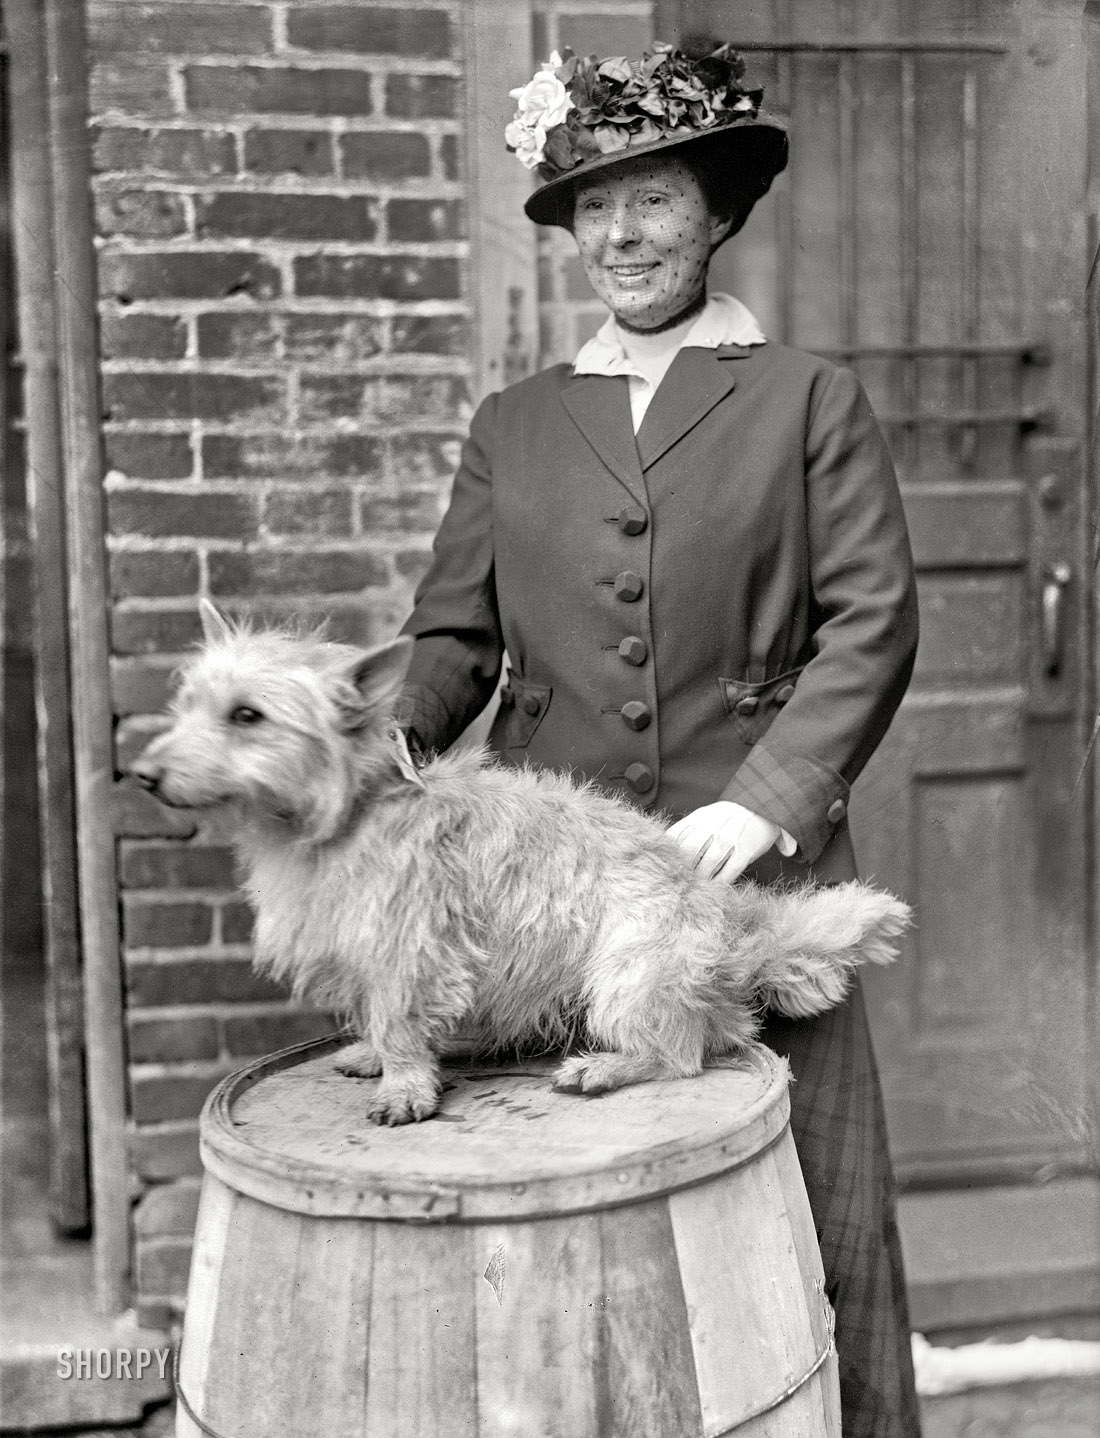 Washington, D.C., 1915. "Dog show." The happy couple, looking bright-eyed and bushy-tailed. Harris & Ewing Collection glass negative. View full size.